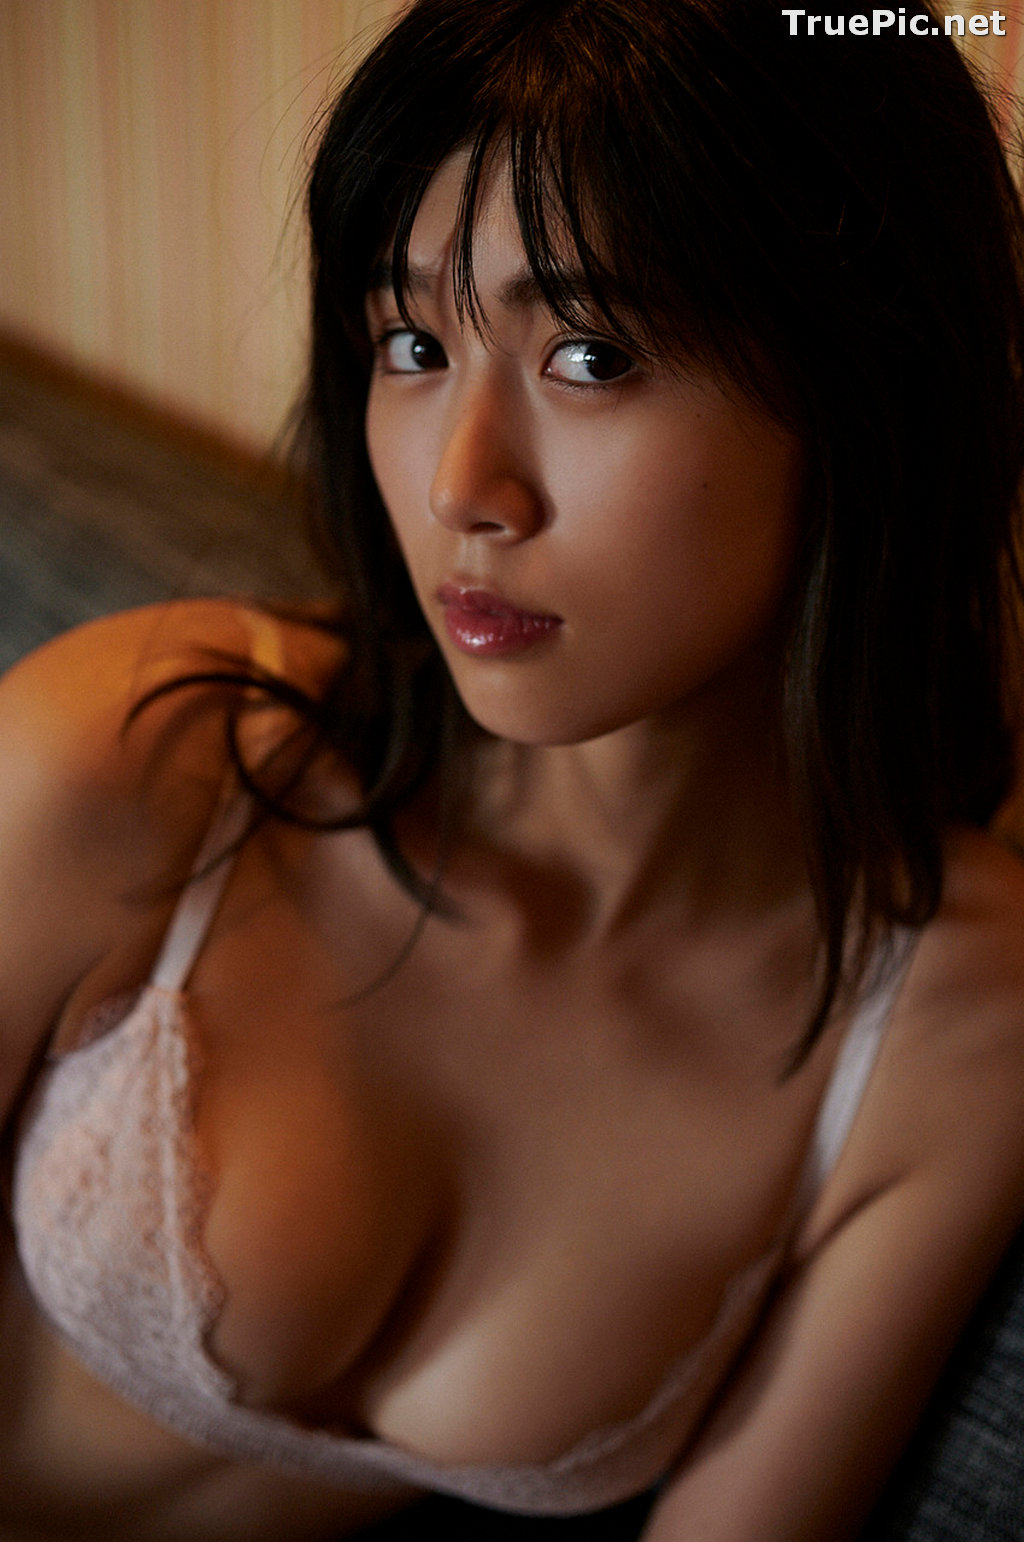 ImageJapanese Gravure Idol and Actress - Kitamuki Miyu (北向珠夕) - Sexy Picture Collection 2020 - TruePic.net - Picture-54